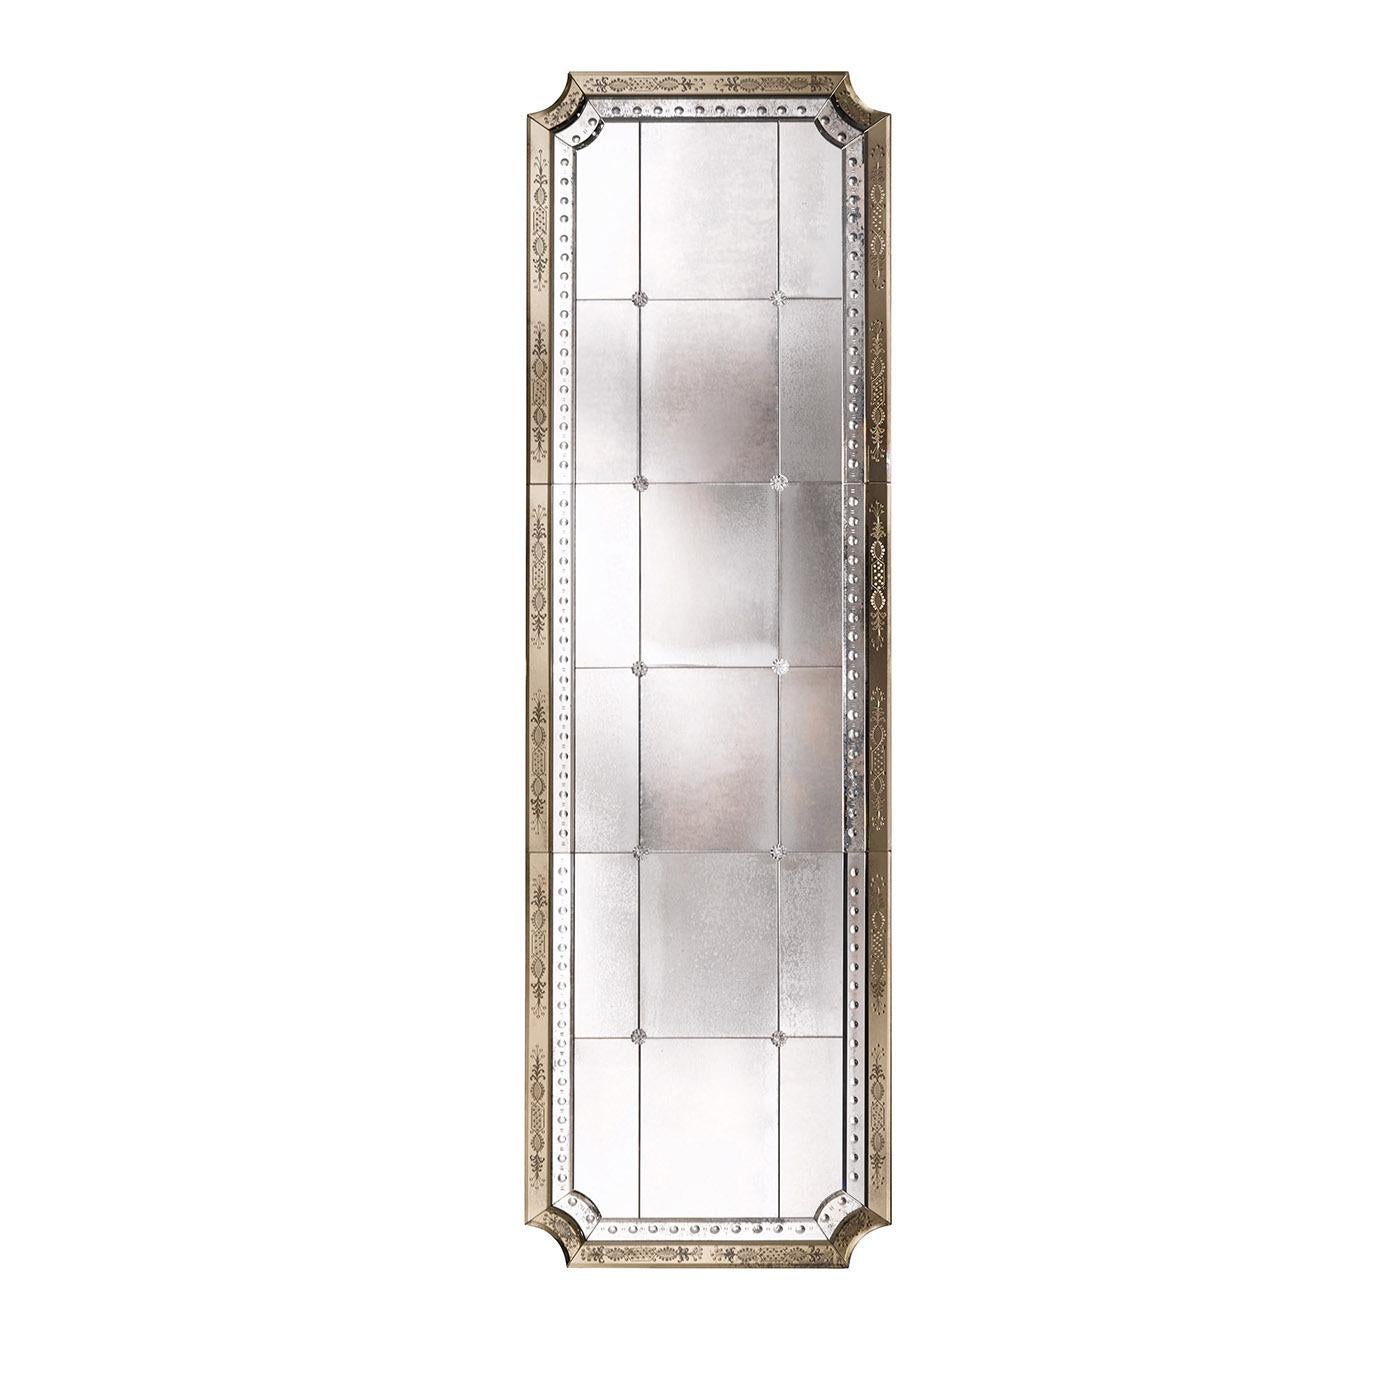 Part of the Louix XIV Collection, this elaborate mirror is inspired by the 18th-century French style. The structure is made of fir wood with dark walnut colour finish and rounded corners. The central part is made of bevelled glass with a medium